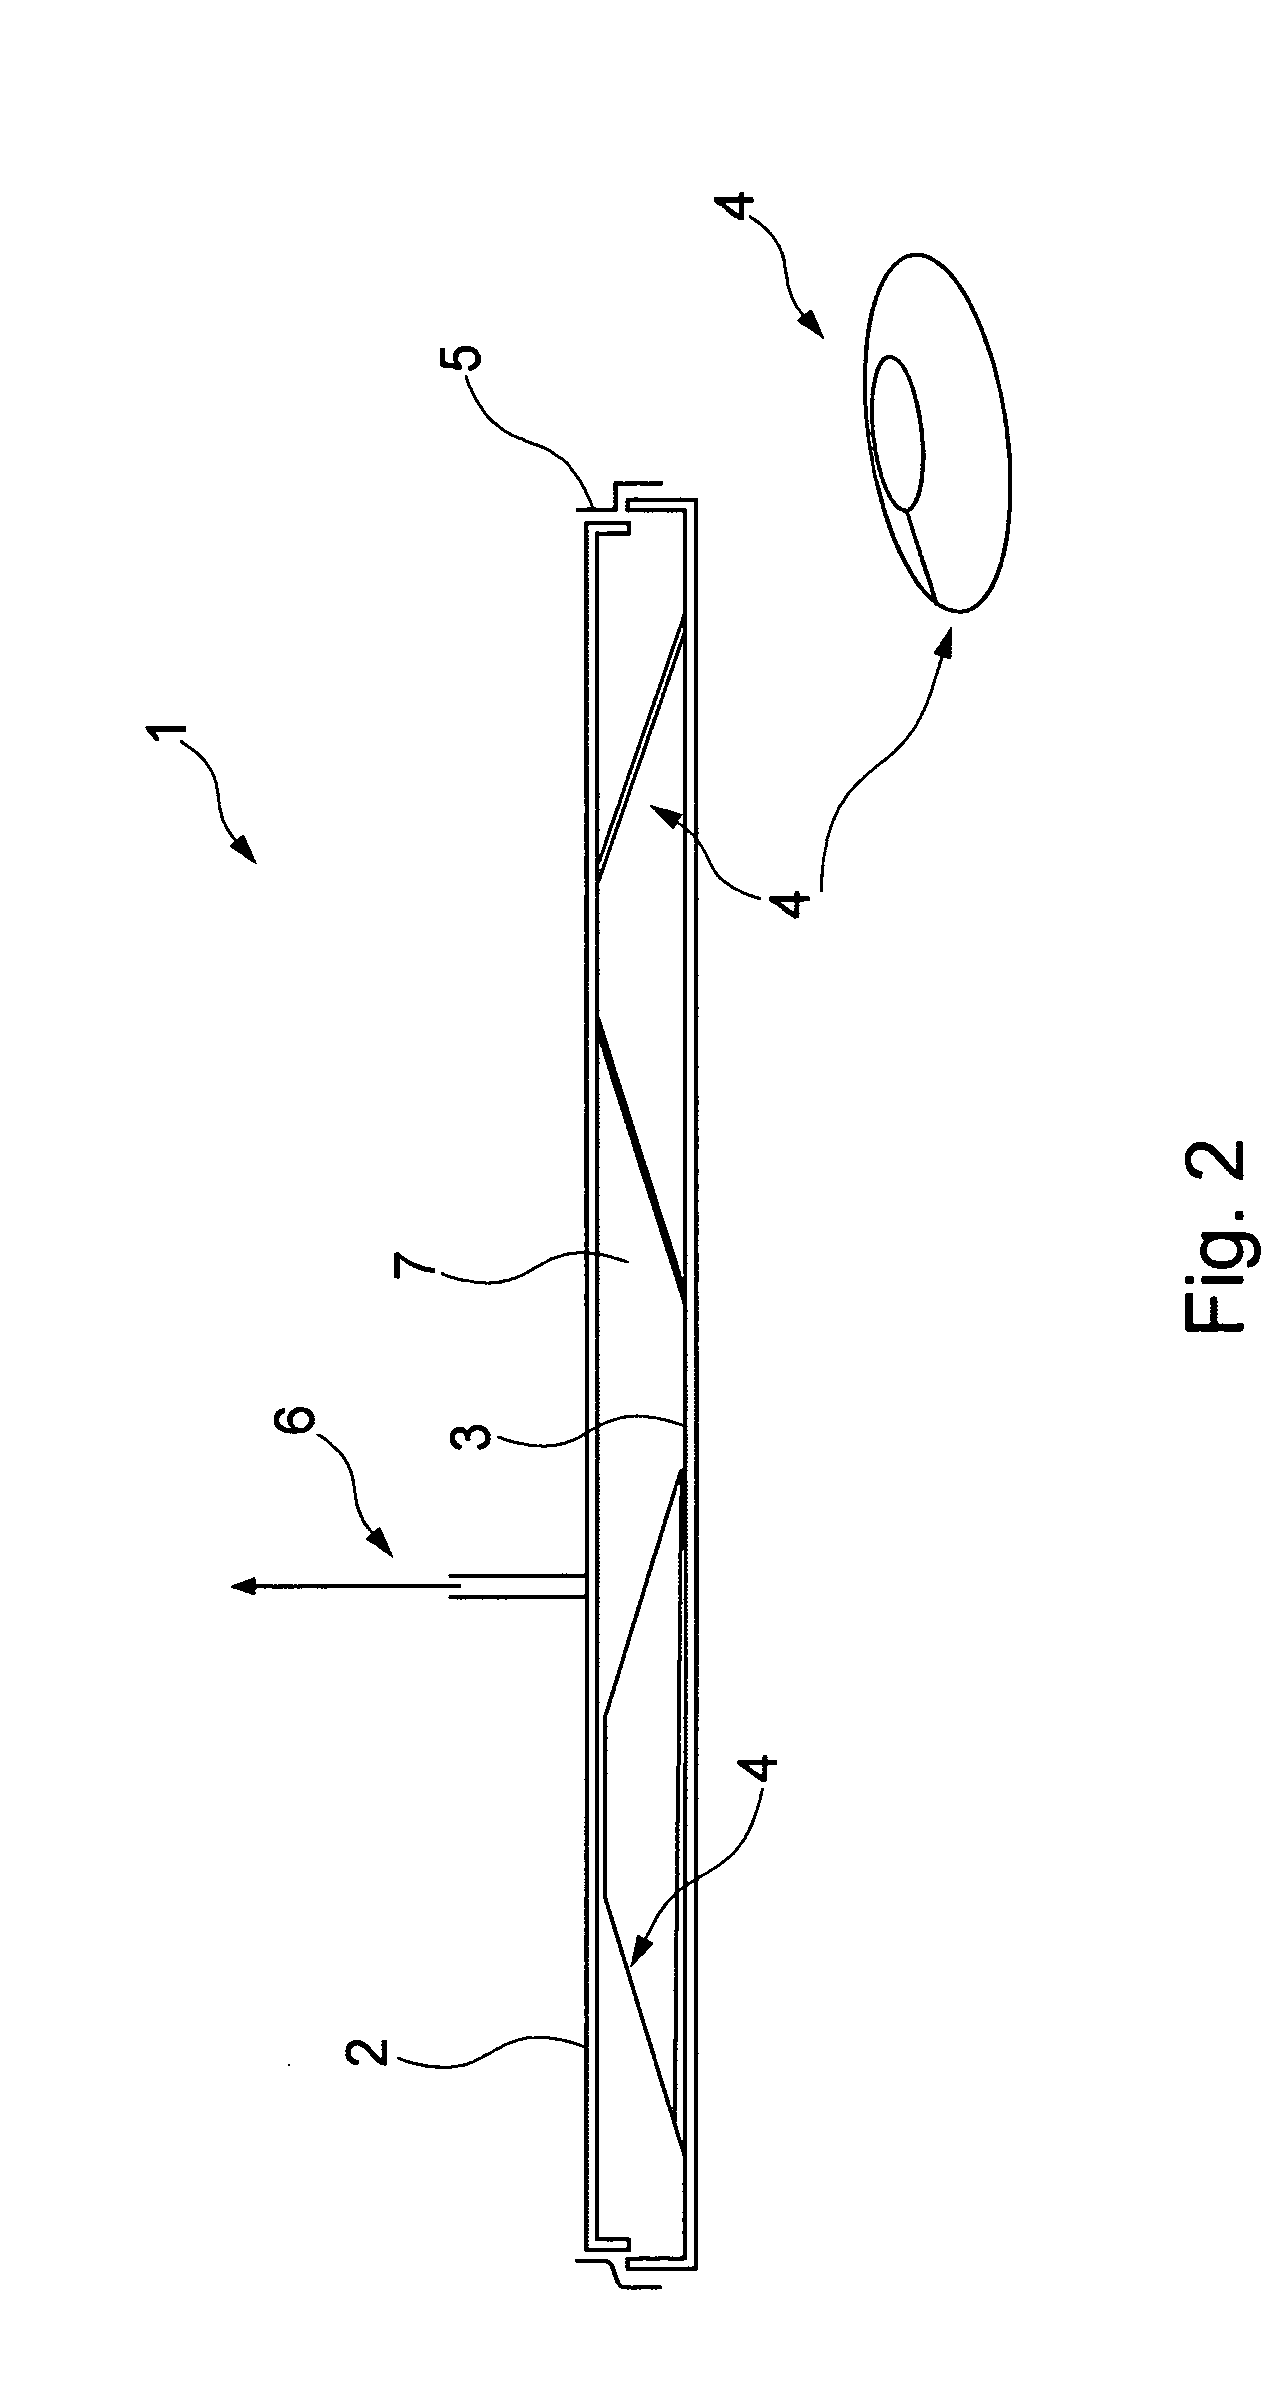 Sound Absorbing Element and Method for Producing a Sound Absorbing Element